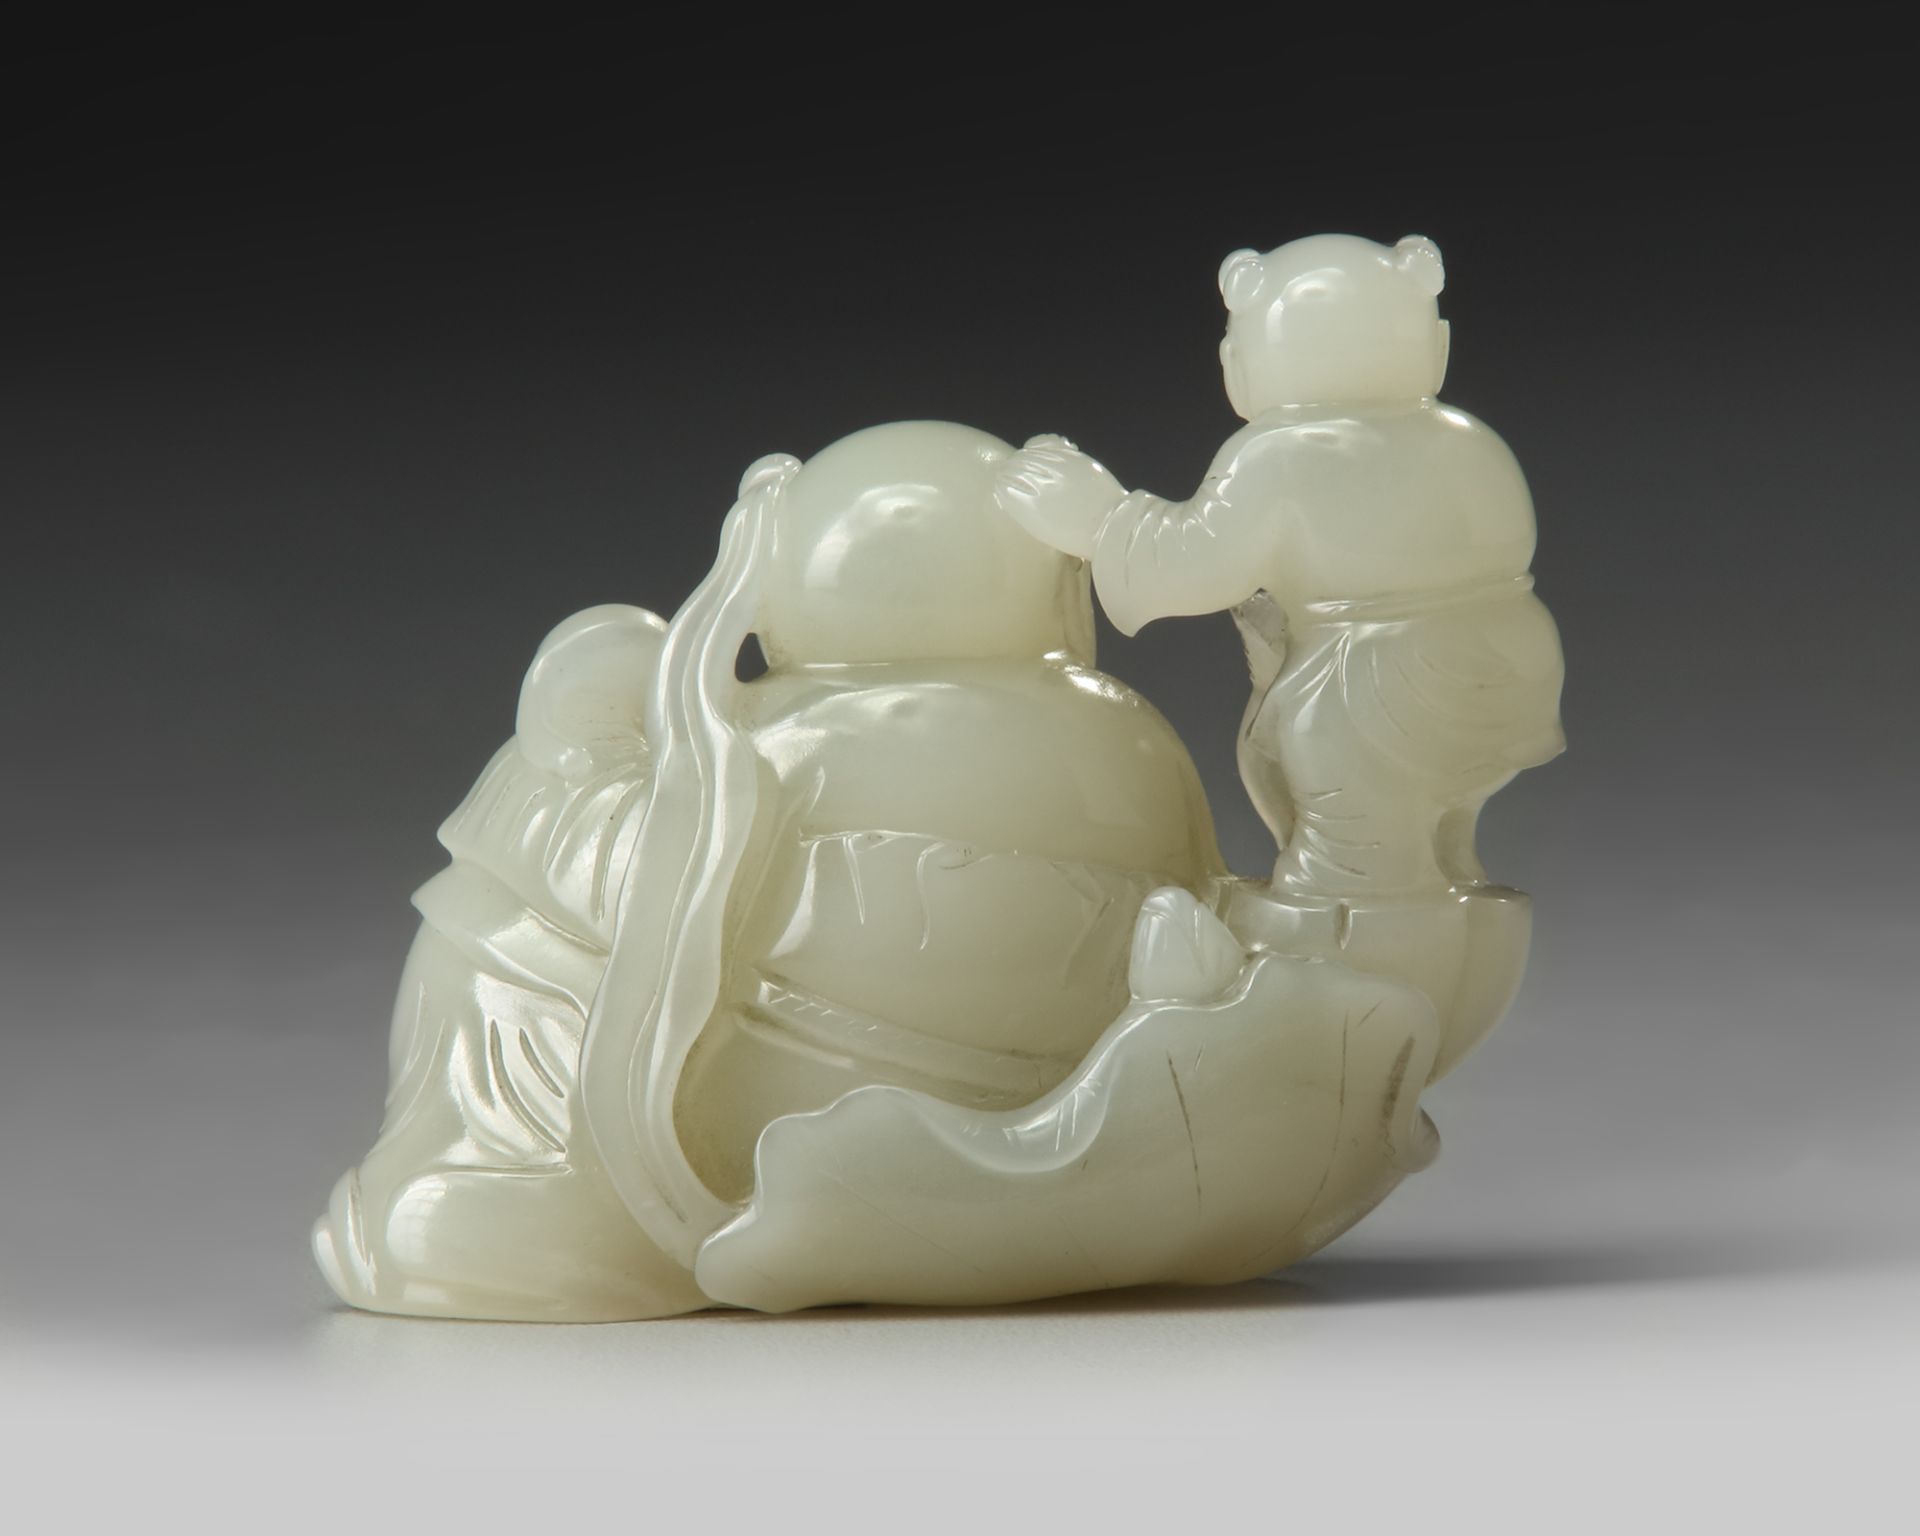 A CHINESE PALE JADE CARVING OF A MAN AND A BOY - Image 2 of 3